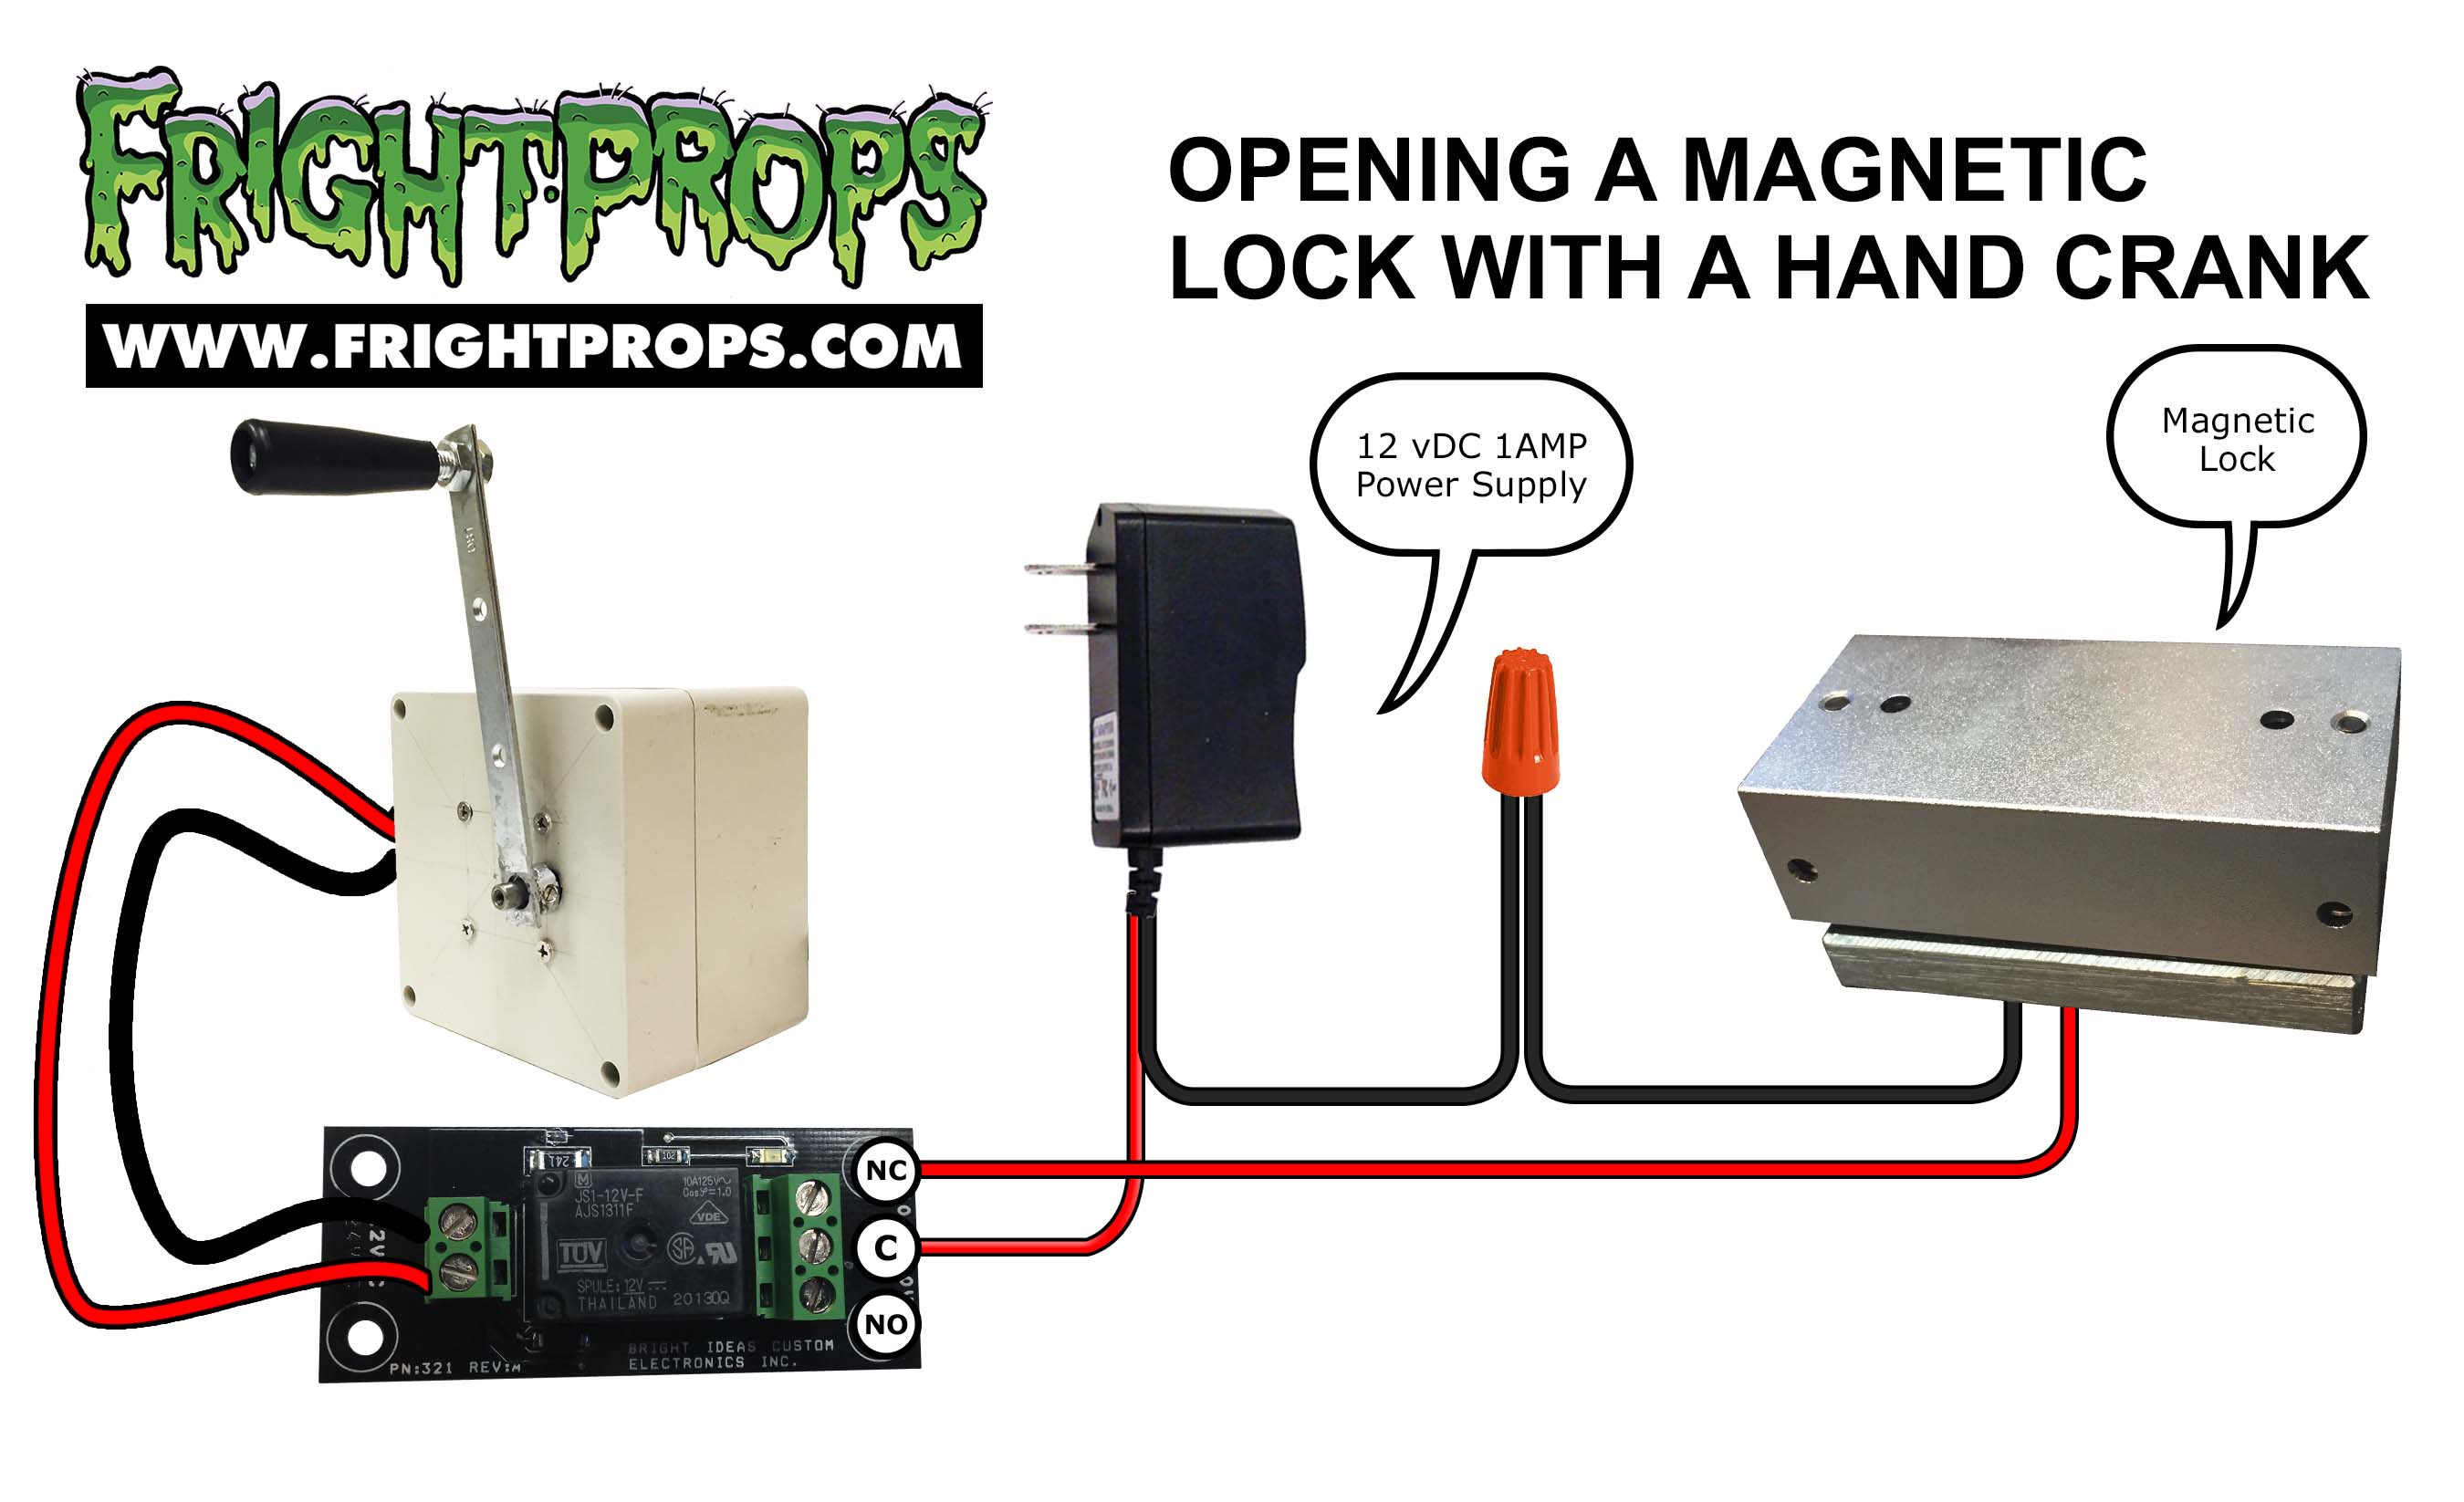 Opening a Magnetic Lock with a Hand Crank